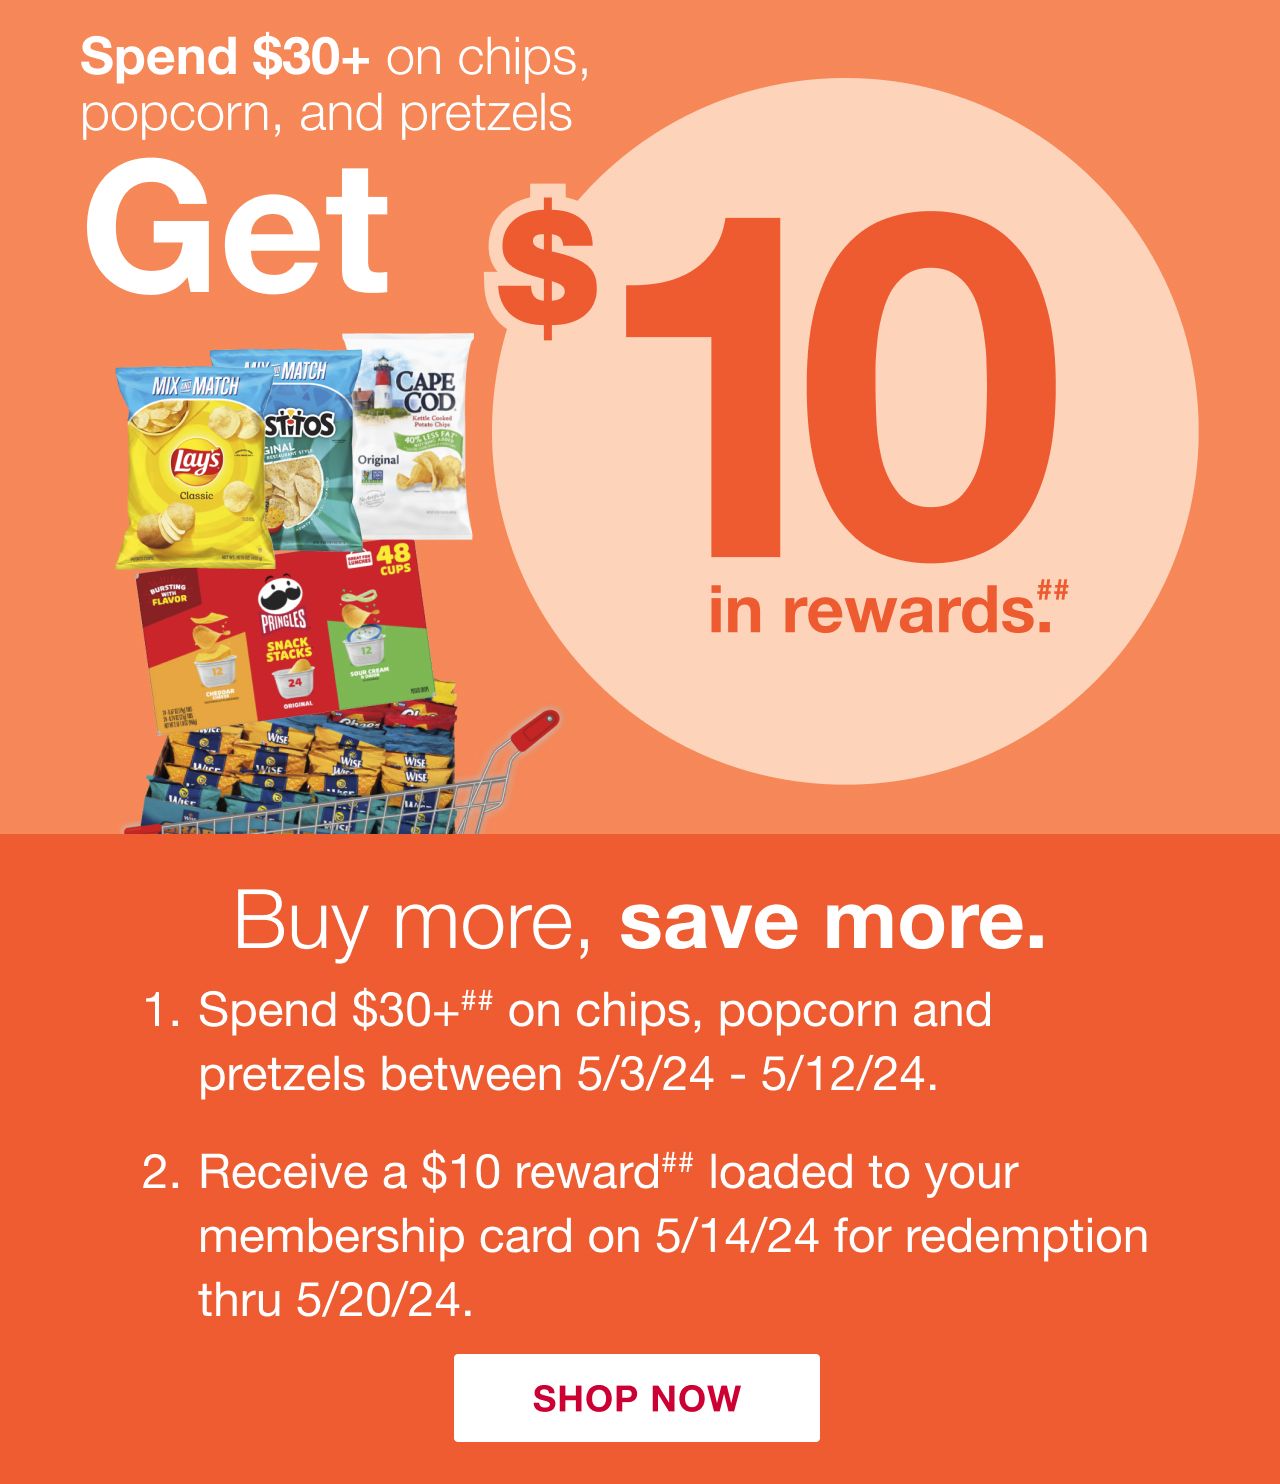 Spend $30+ on chips, popcorn and pretzels and get $10 in rewards. Learn more below. Click to shop now